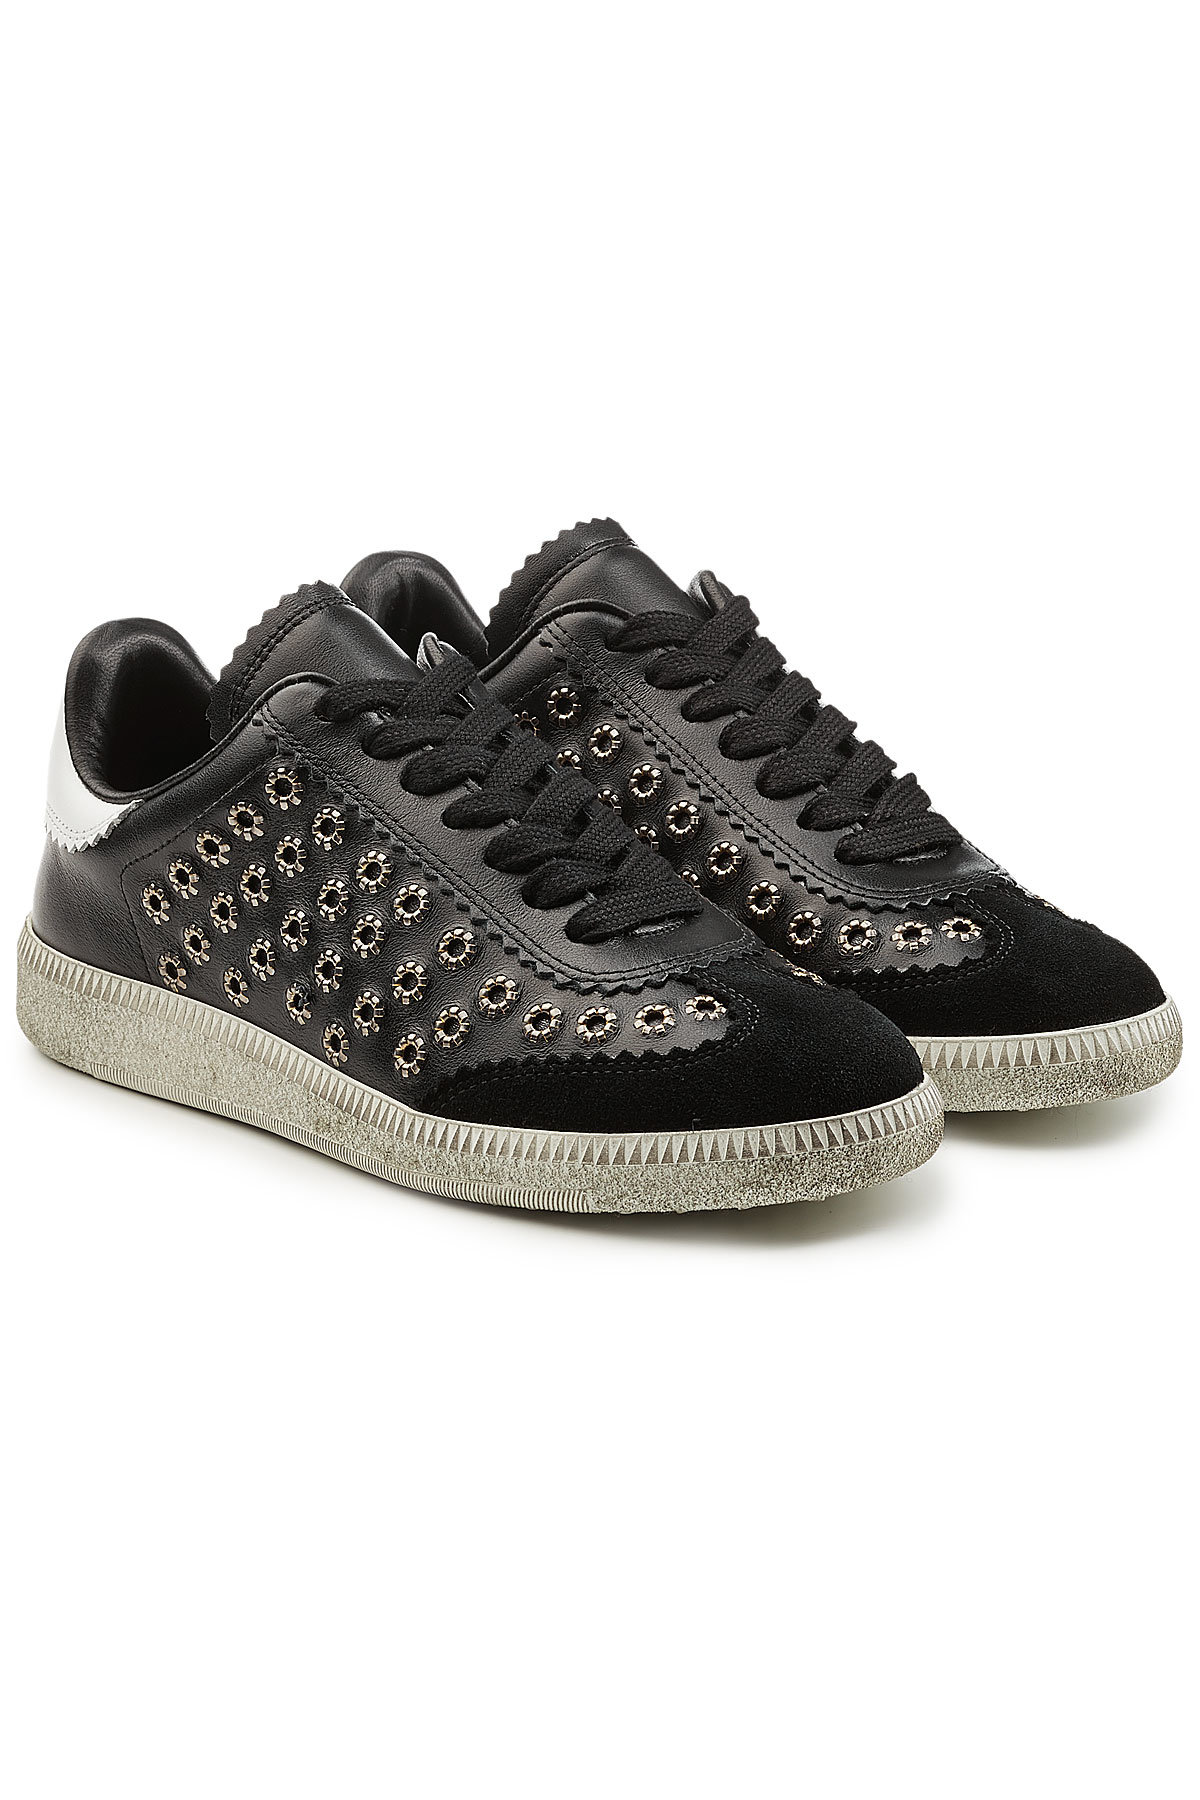 Isabel Marant - Bryce Embellished Leather and Suede Sneakers